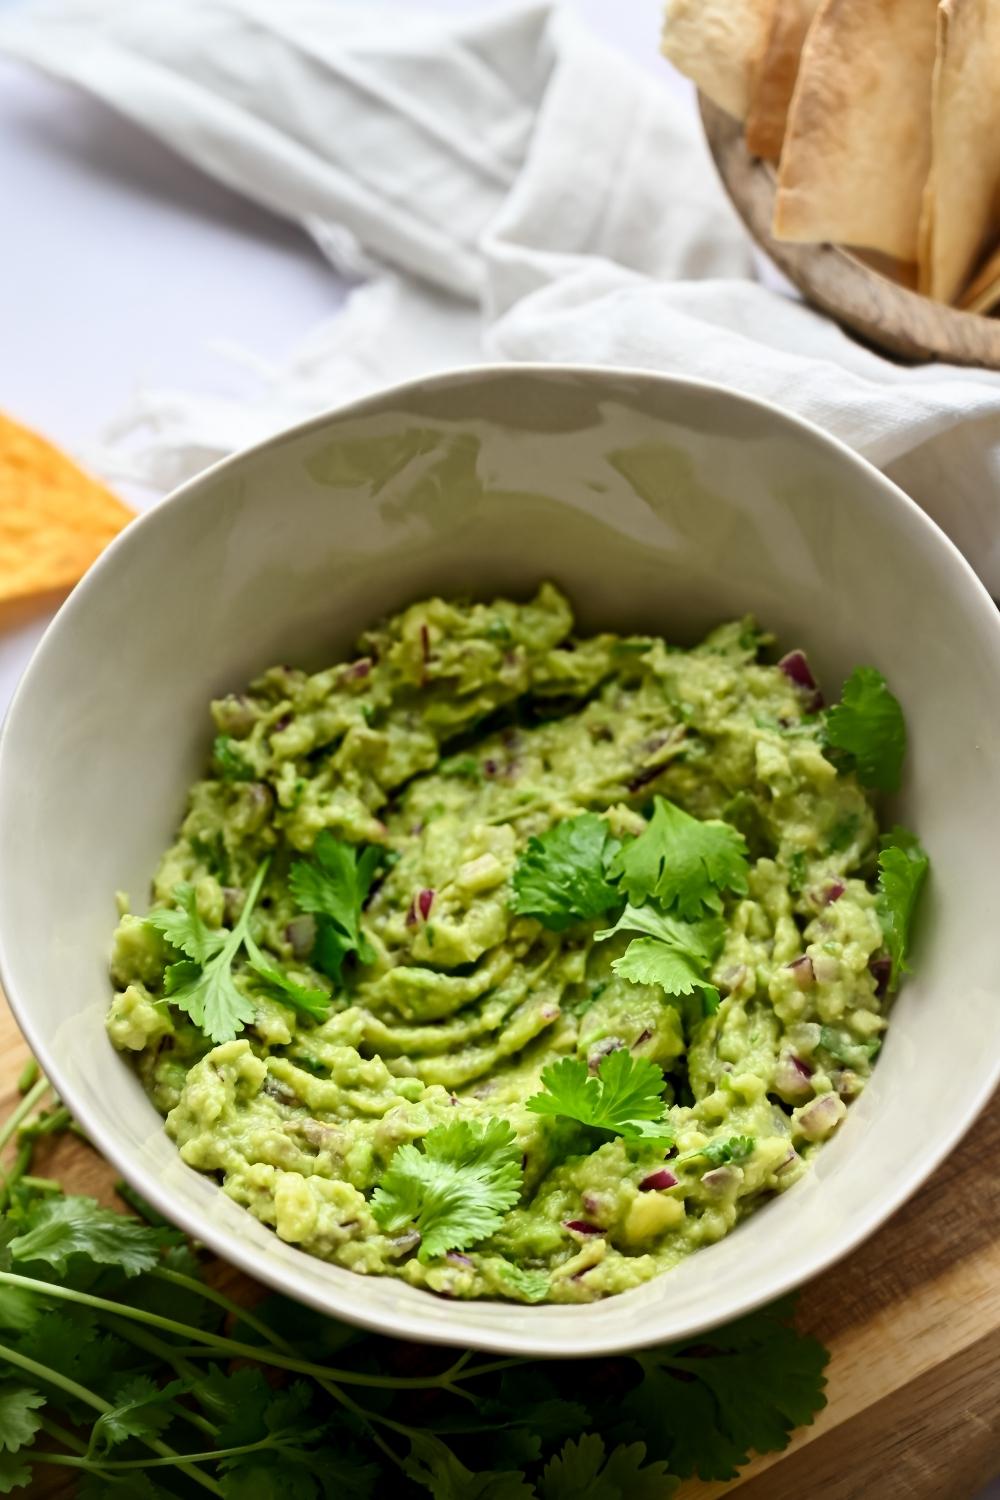 A bowl of homemade chipotle guacamole garnished with parsley served on a wooden cutting board.